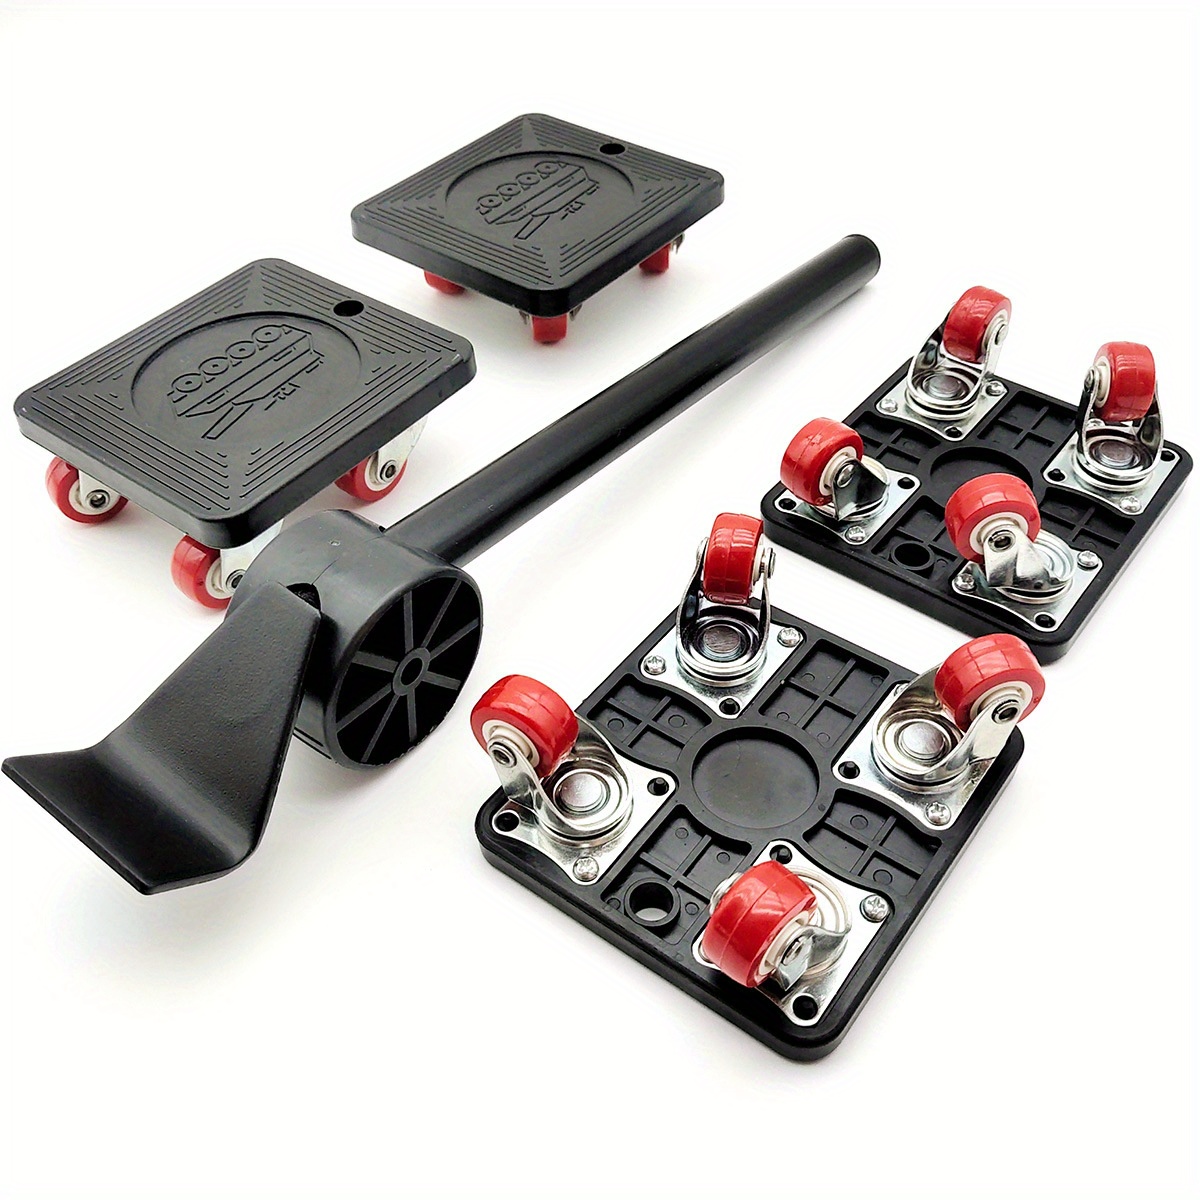 Furniture Movers with Wheels & Furniture Lifter Set, 360 Rotation wheels  with Load Capacity 880 Lbs, $49.99 FREE FOR USA  PRODUCT REVIEWERS,  DM ME IF YOU ARE INTERESTED. : r/AMZreviewTrader